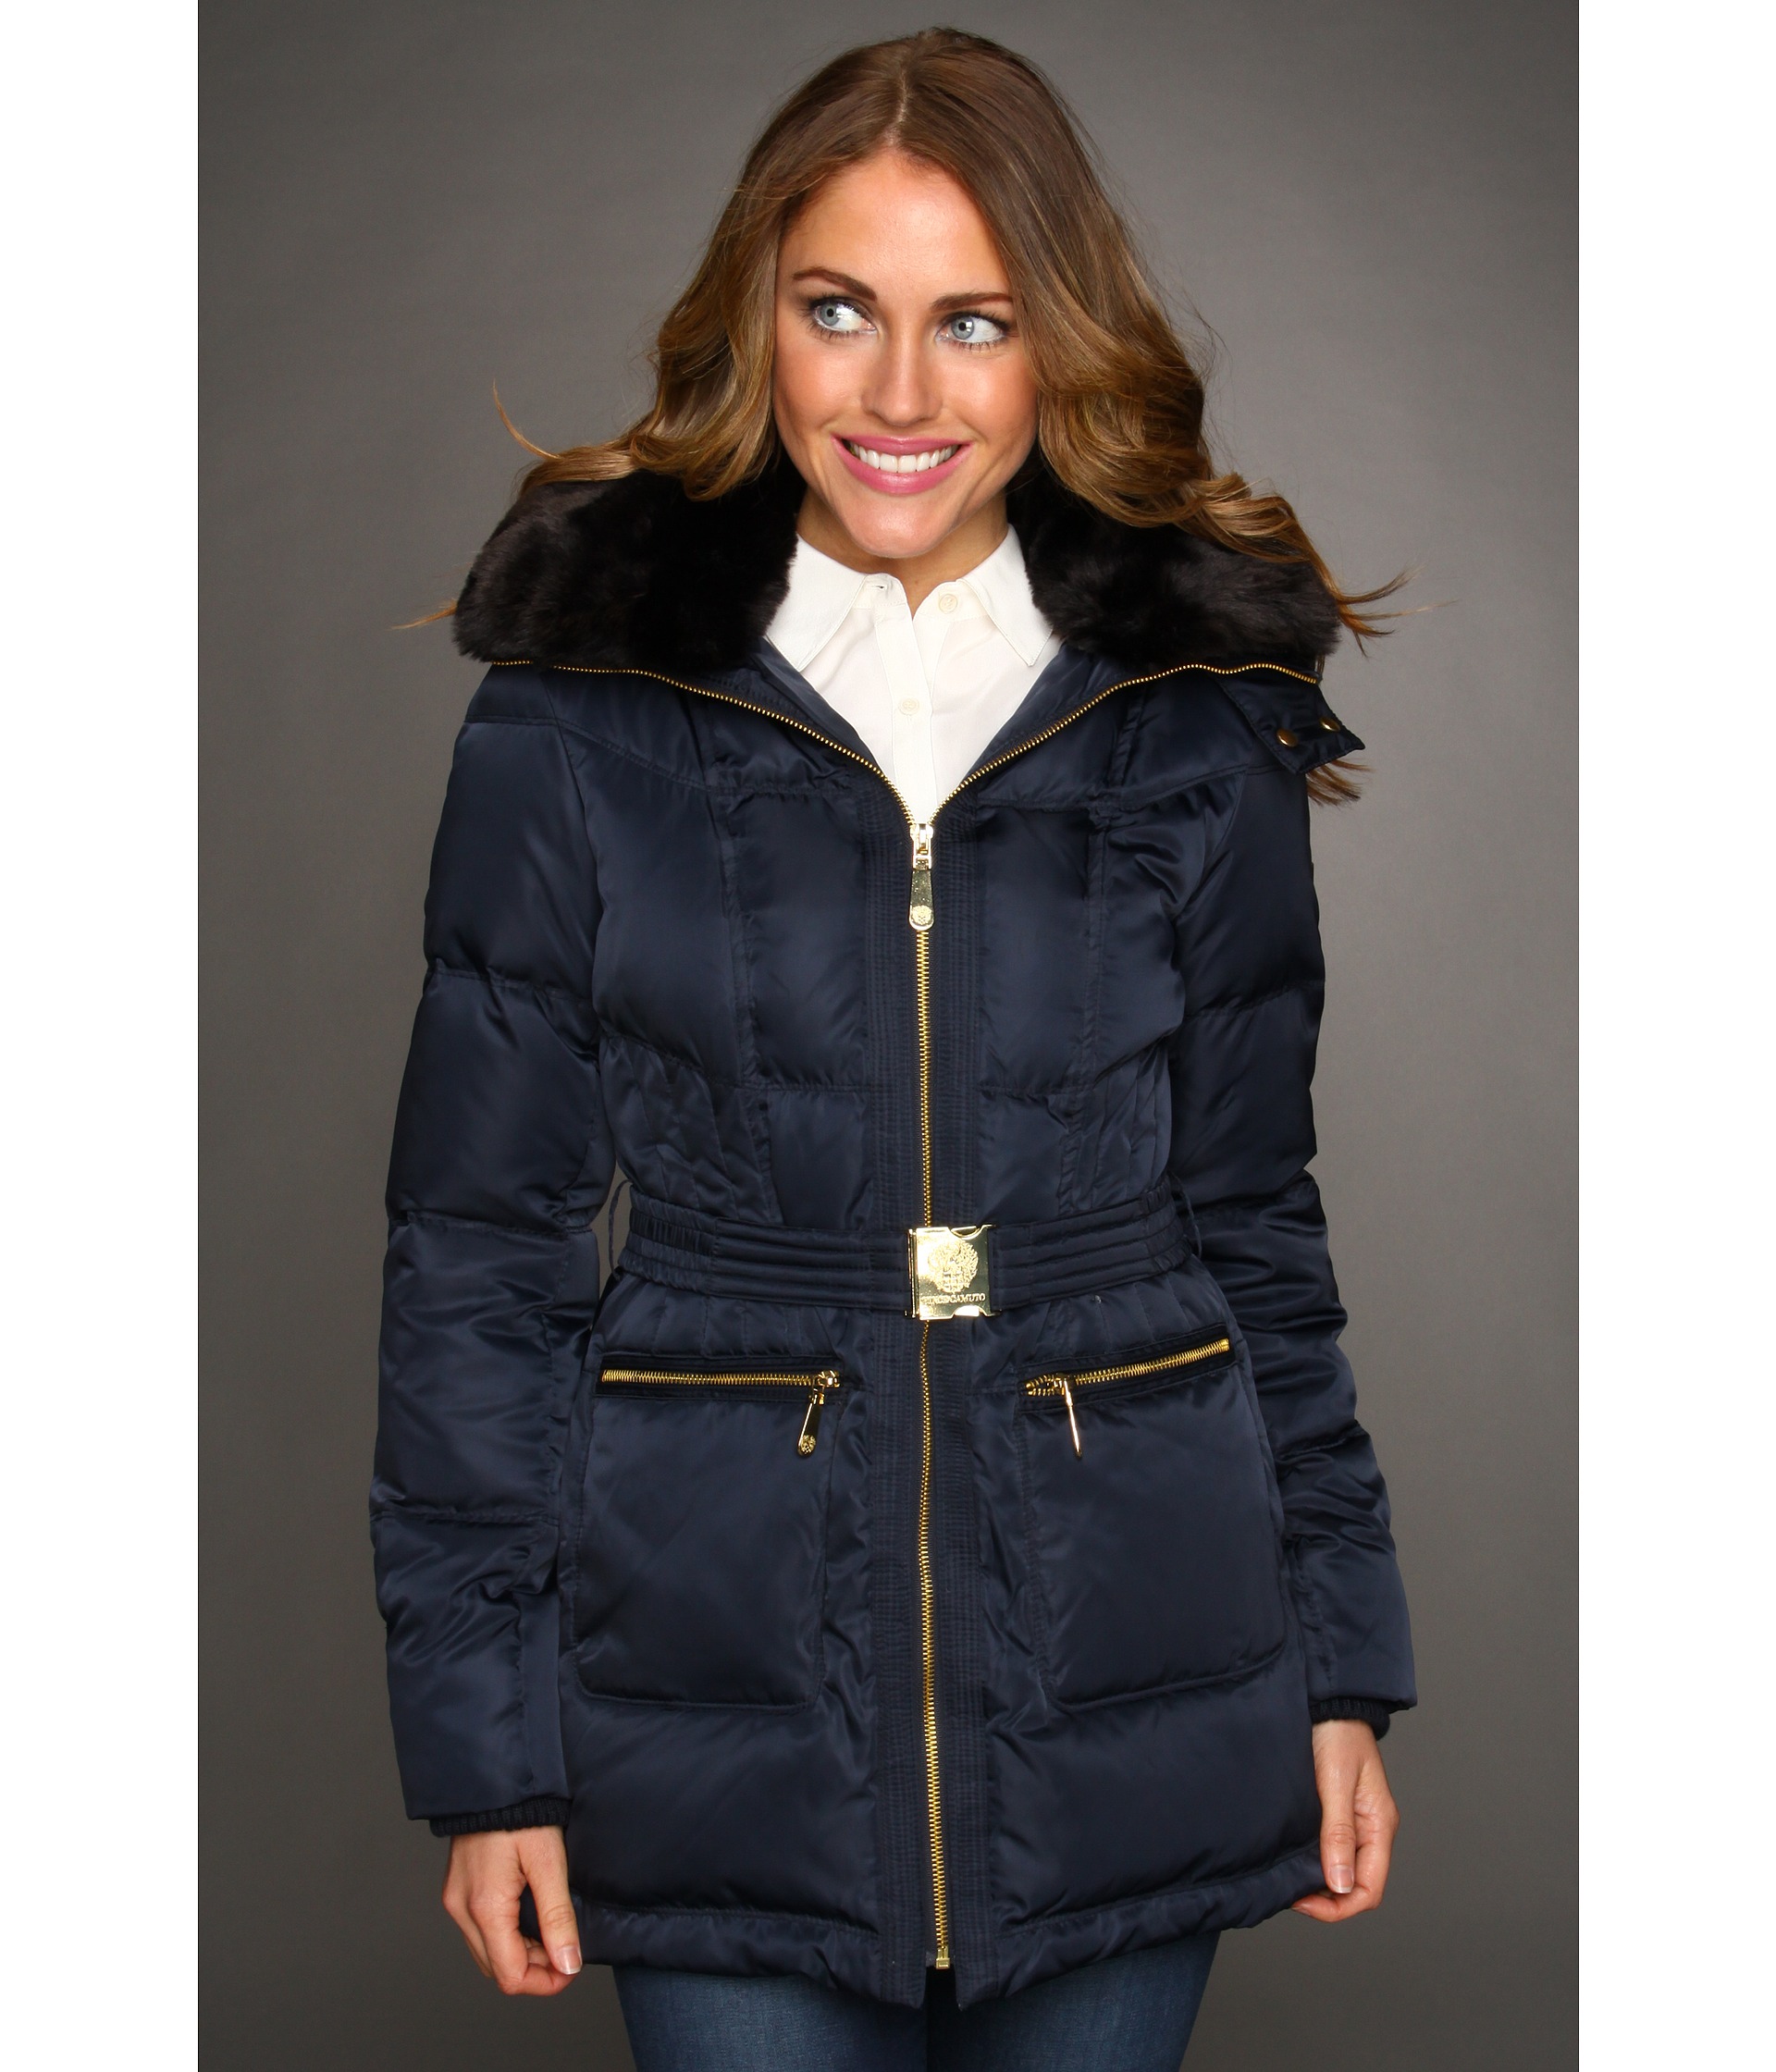 Vince Camuto Faux Fur Trim Coat w/ Gold Hardware $189.00 Rated 5 